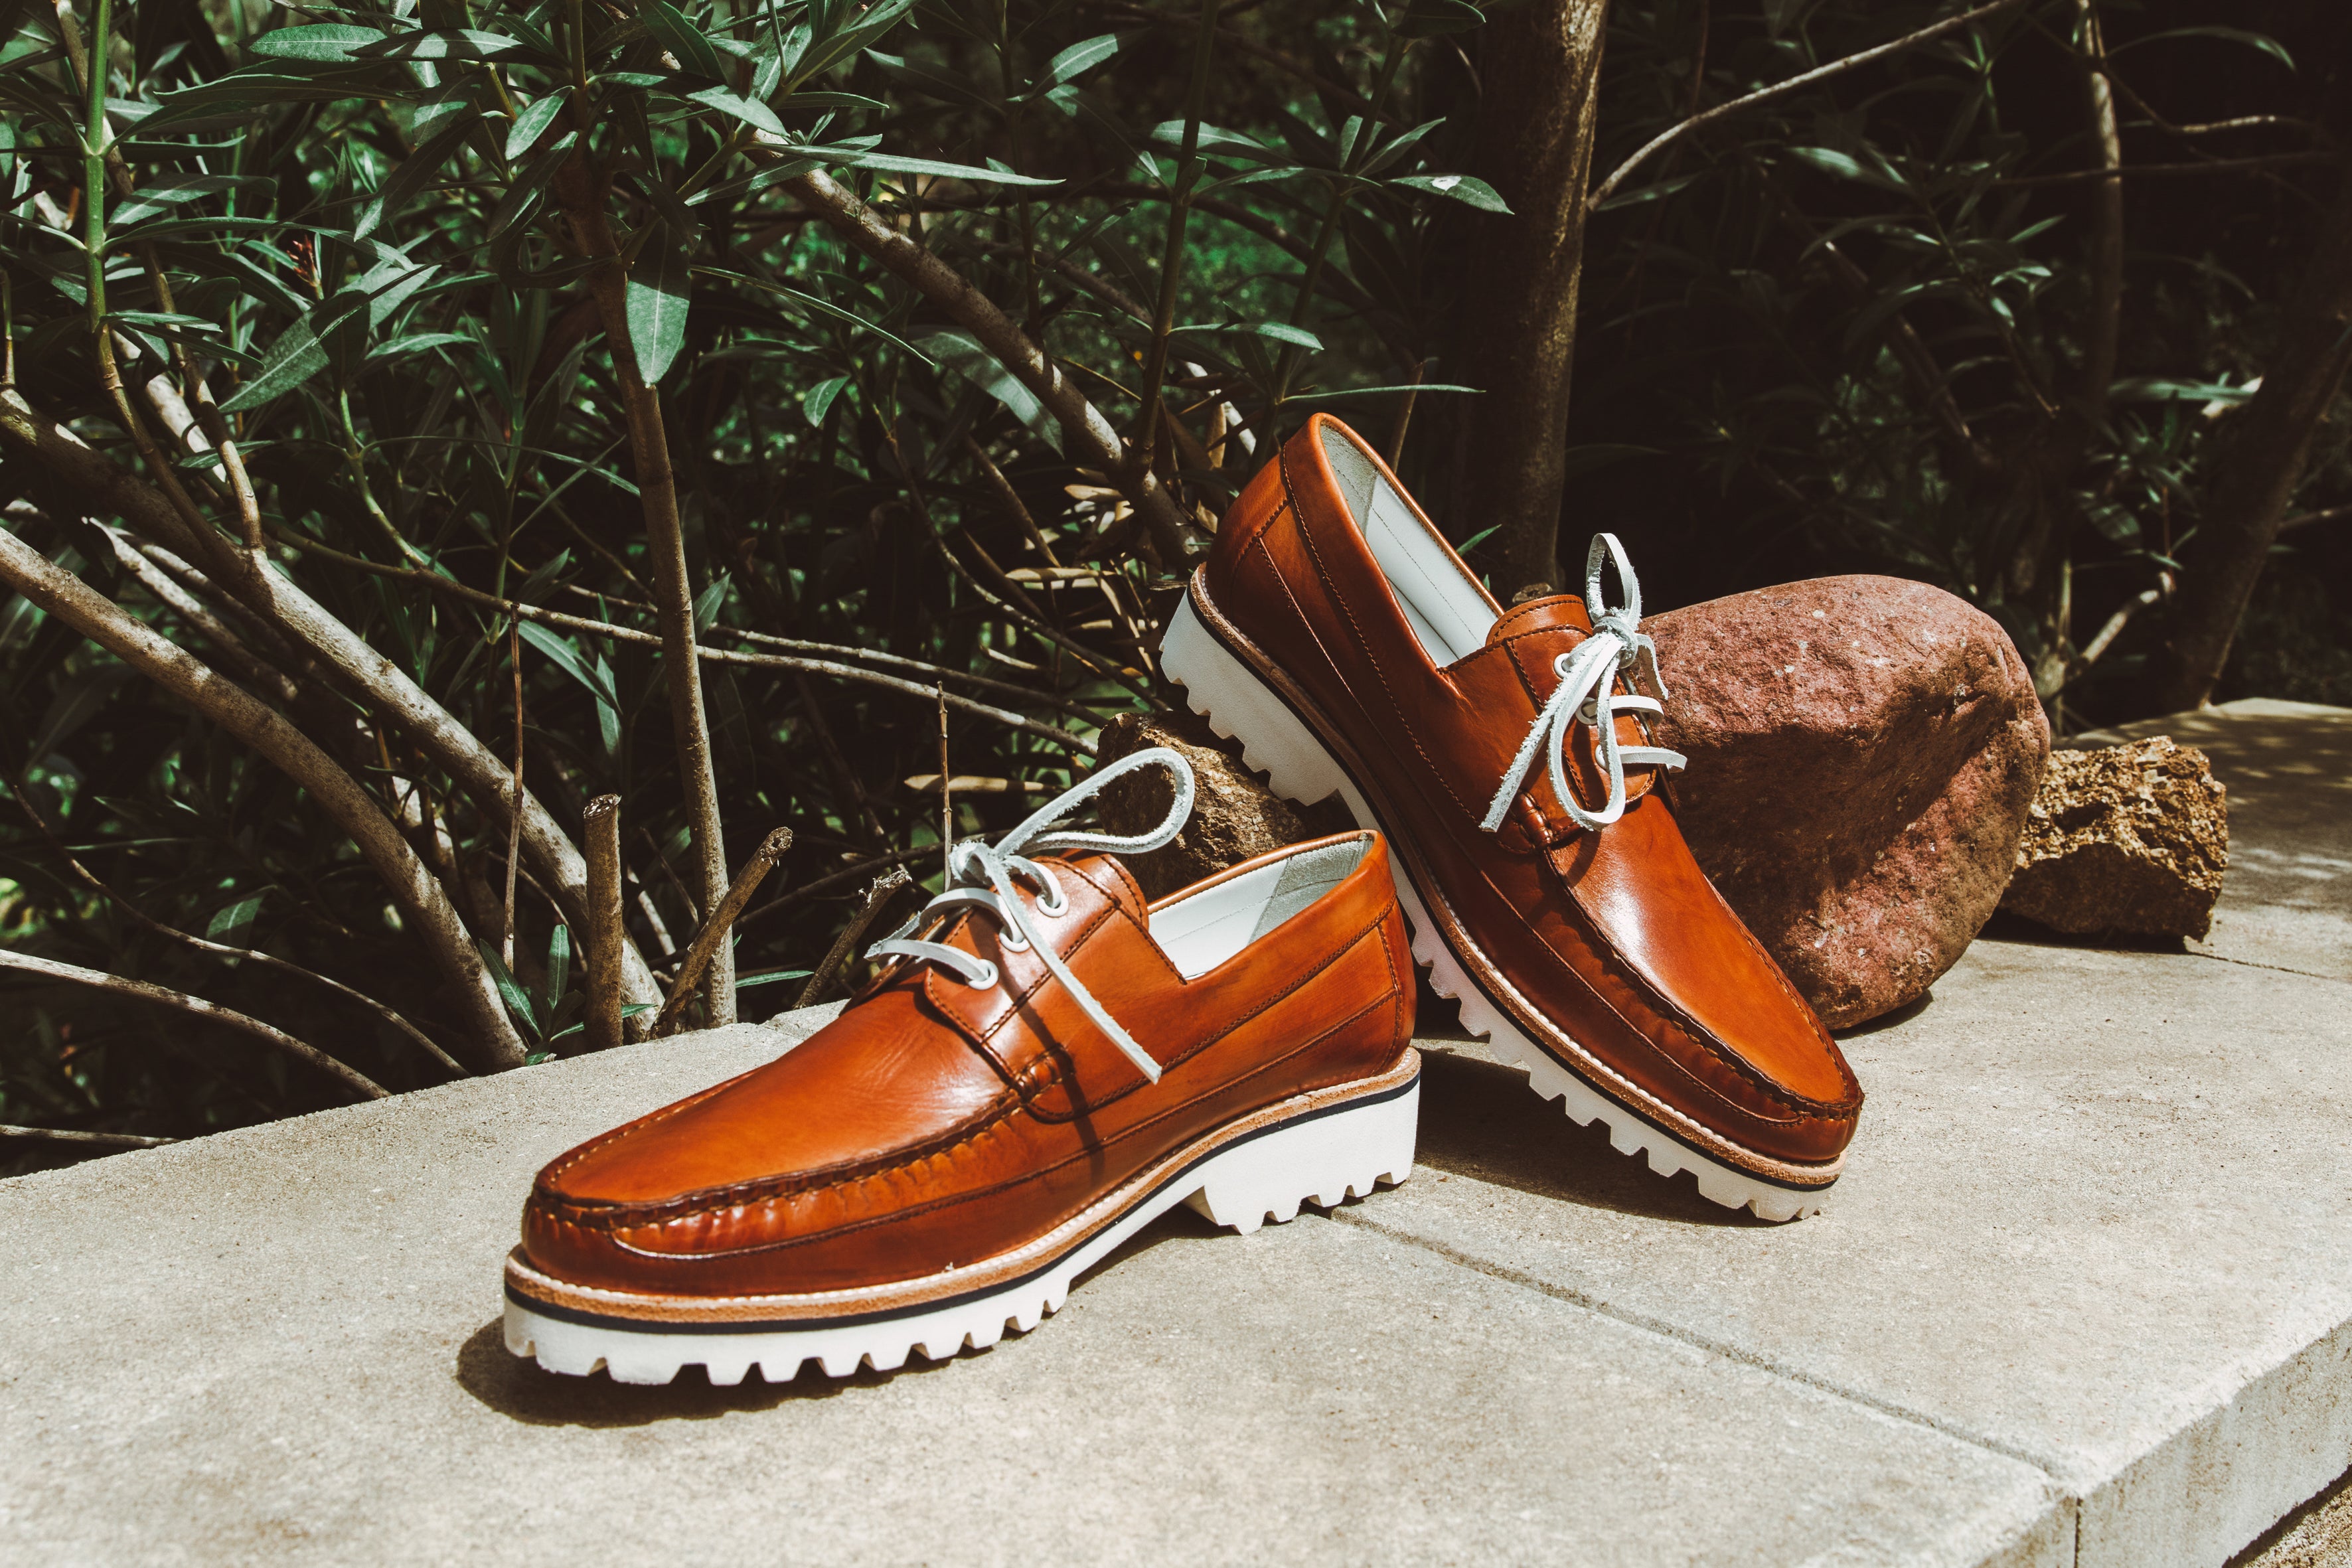 Men's boat shoes: how to wear them this summer? – Melvin & Hamilton